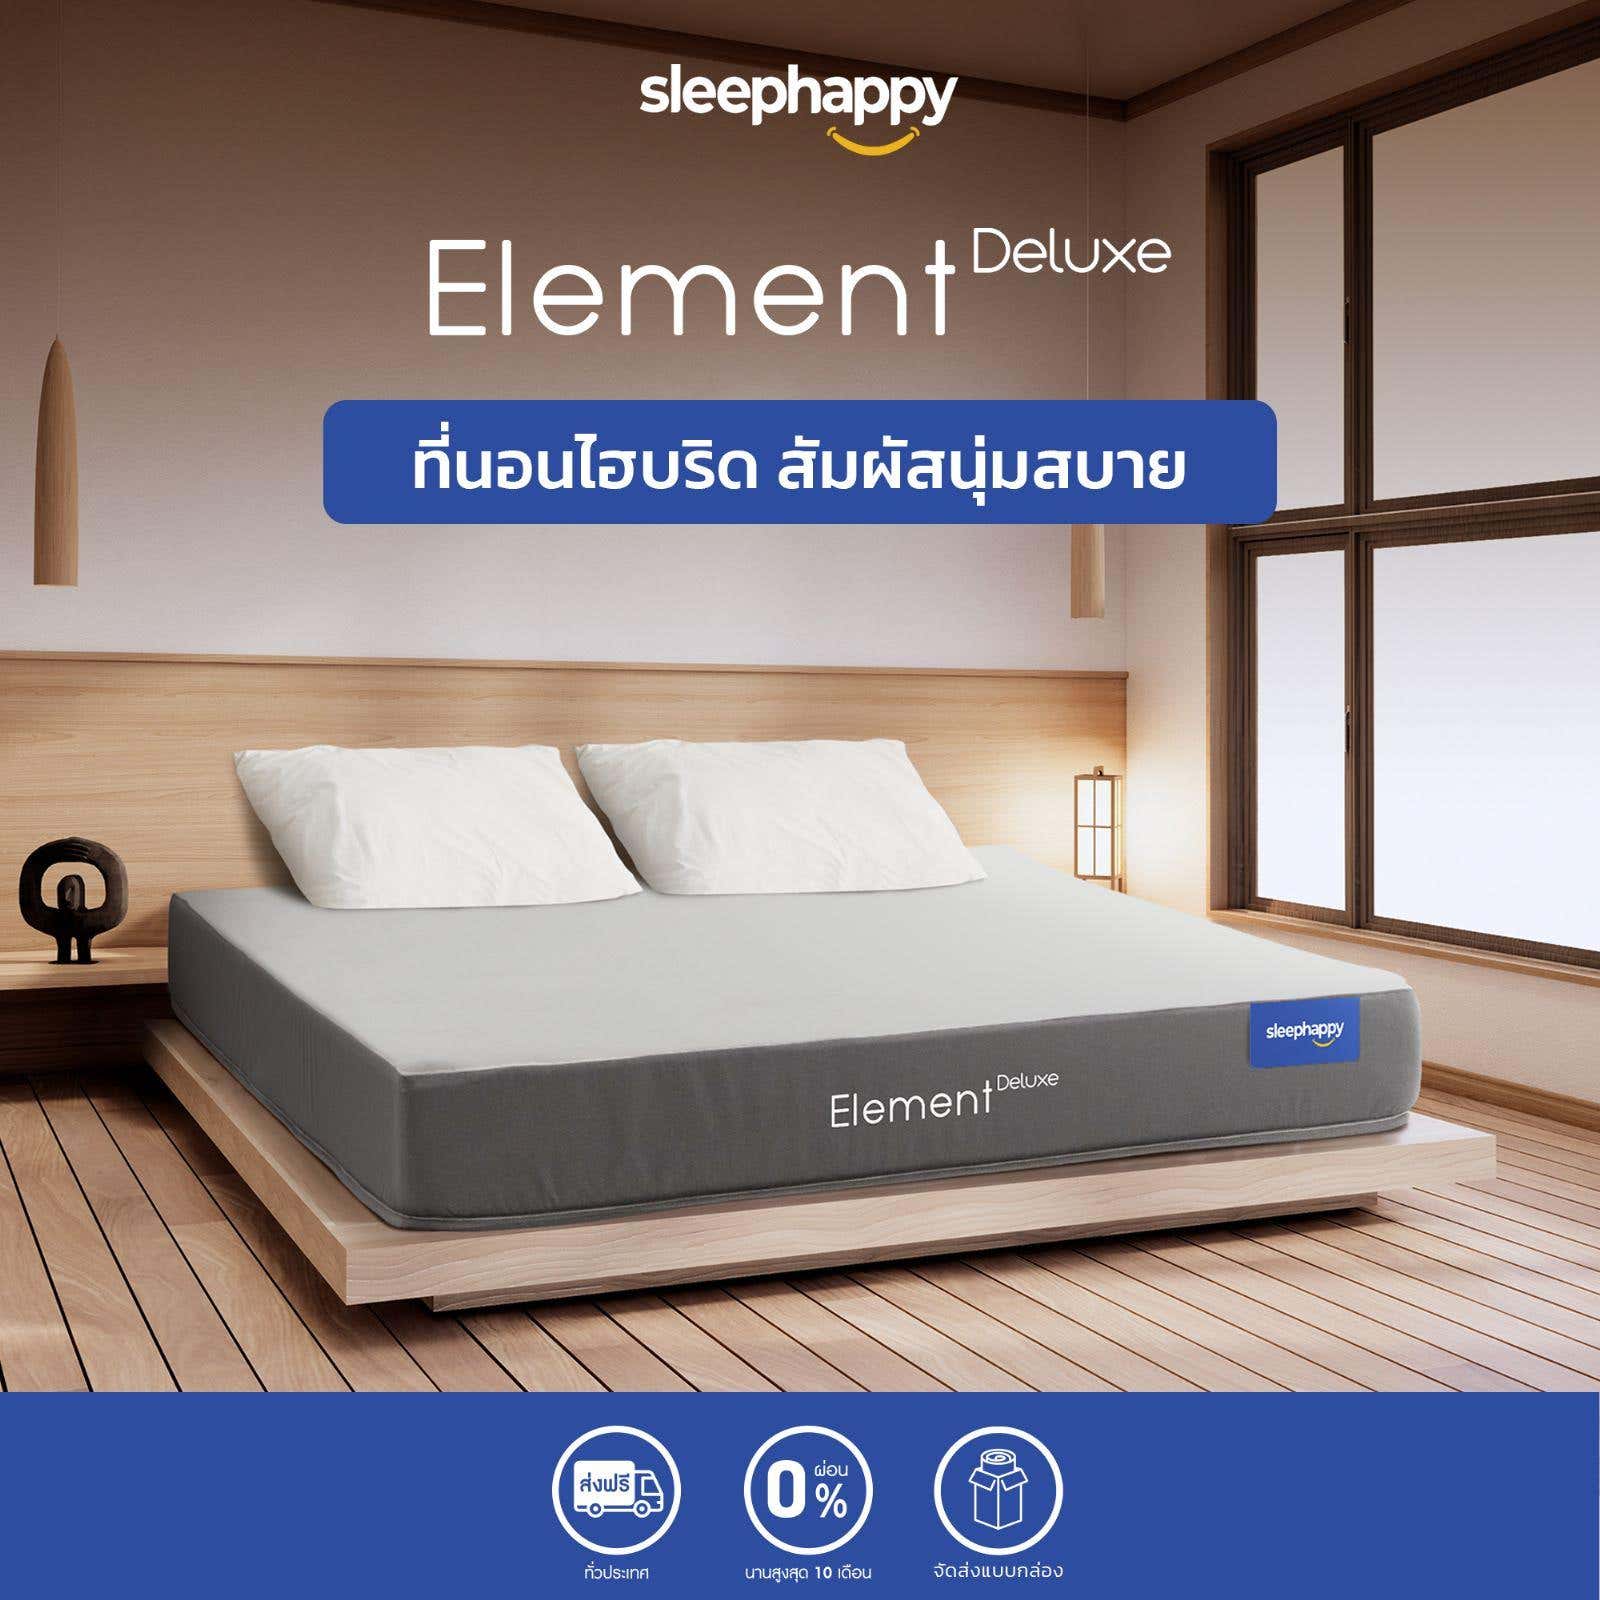 36.89% OFF on SLEEPHAPPY Element Deluxe Mattress Model 3.5 ft. Thick  Inches White